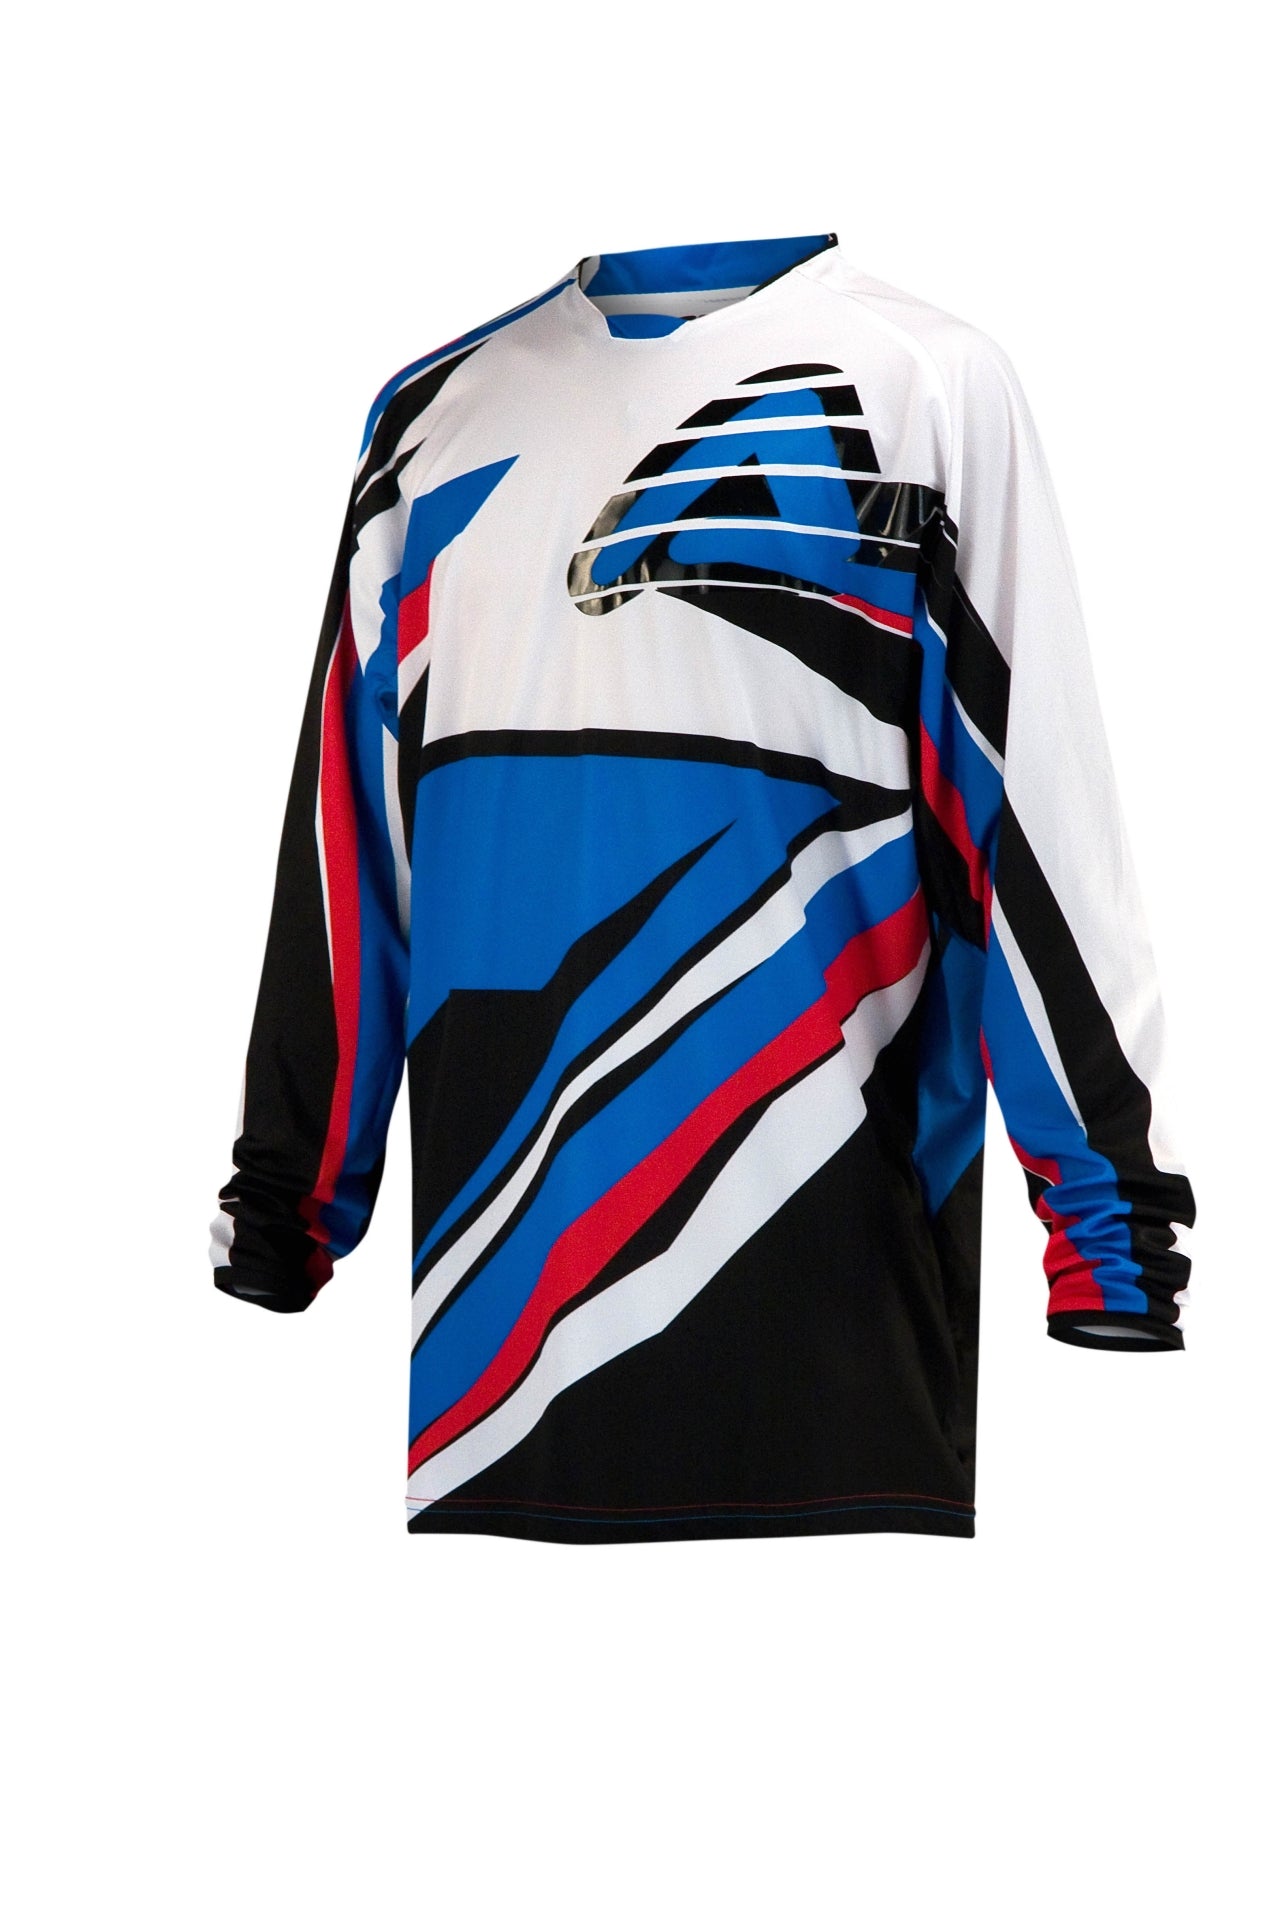 **X-Gear Jersey BLUE/RED NOW £11.00